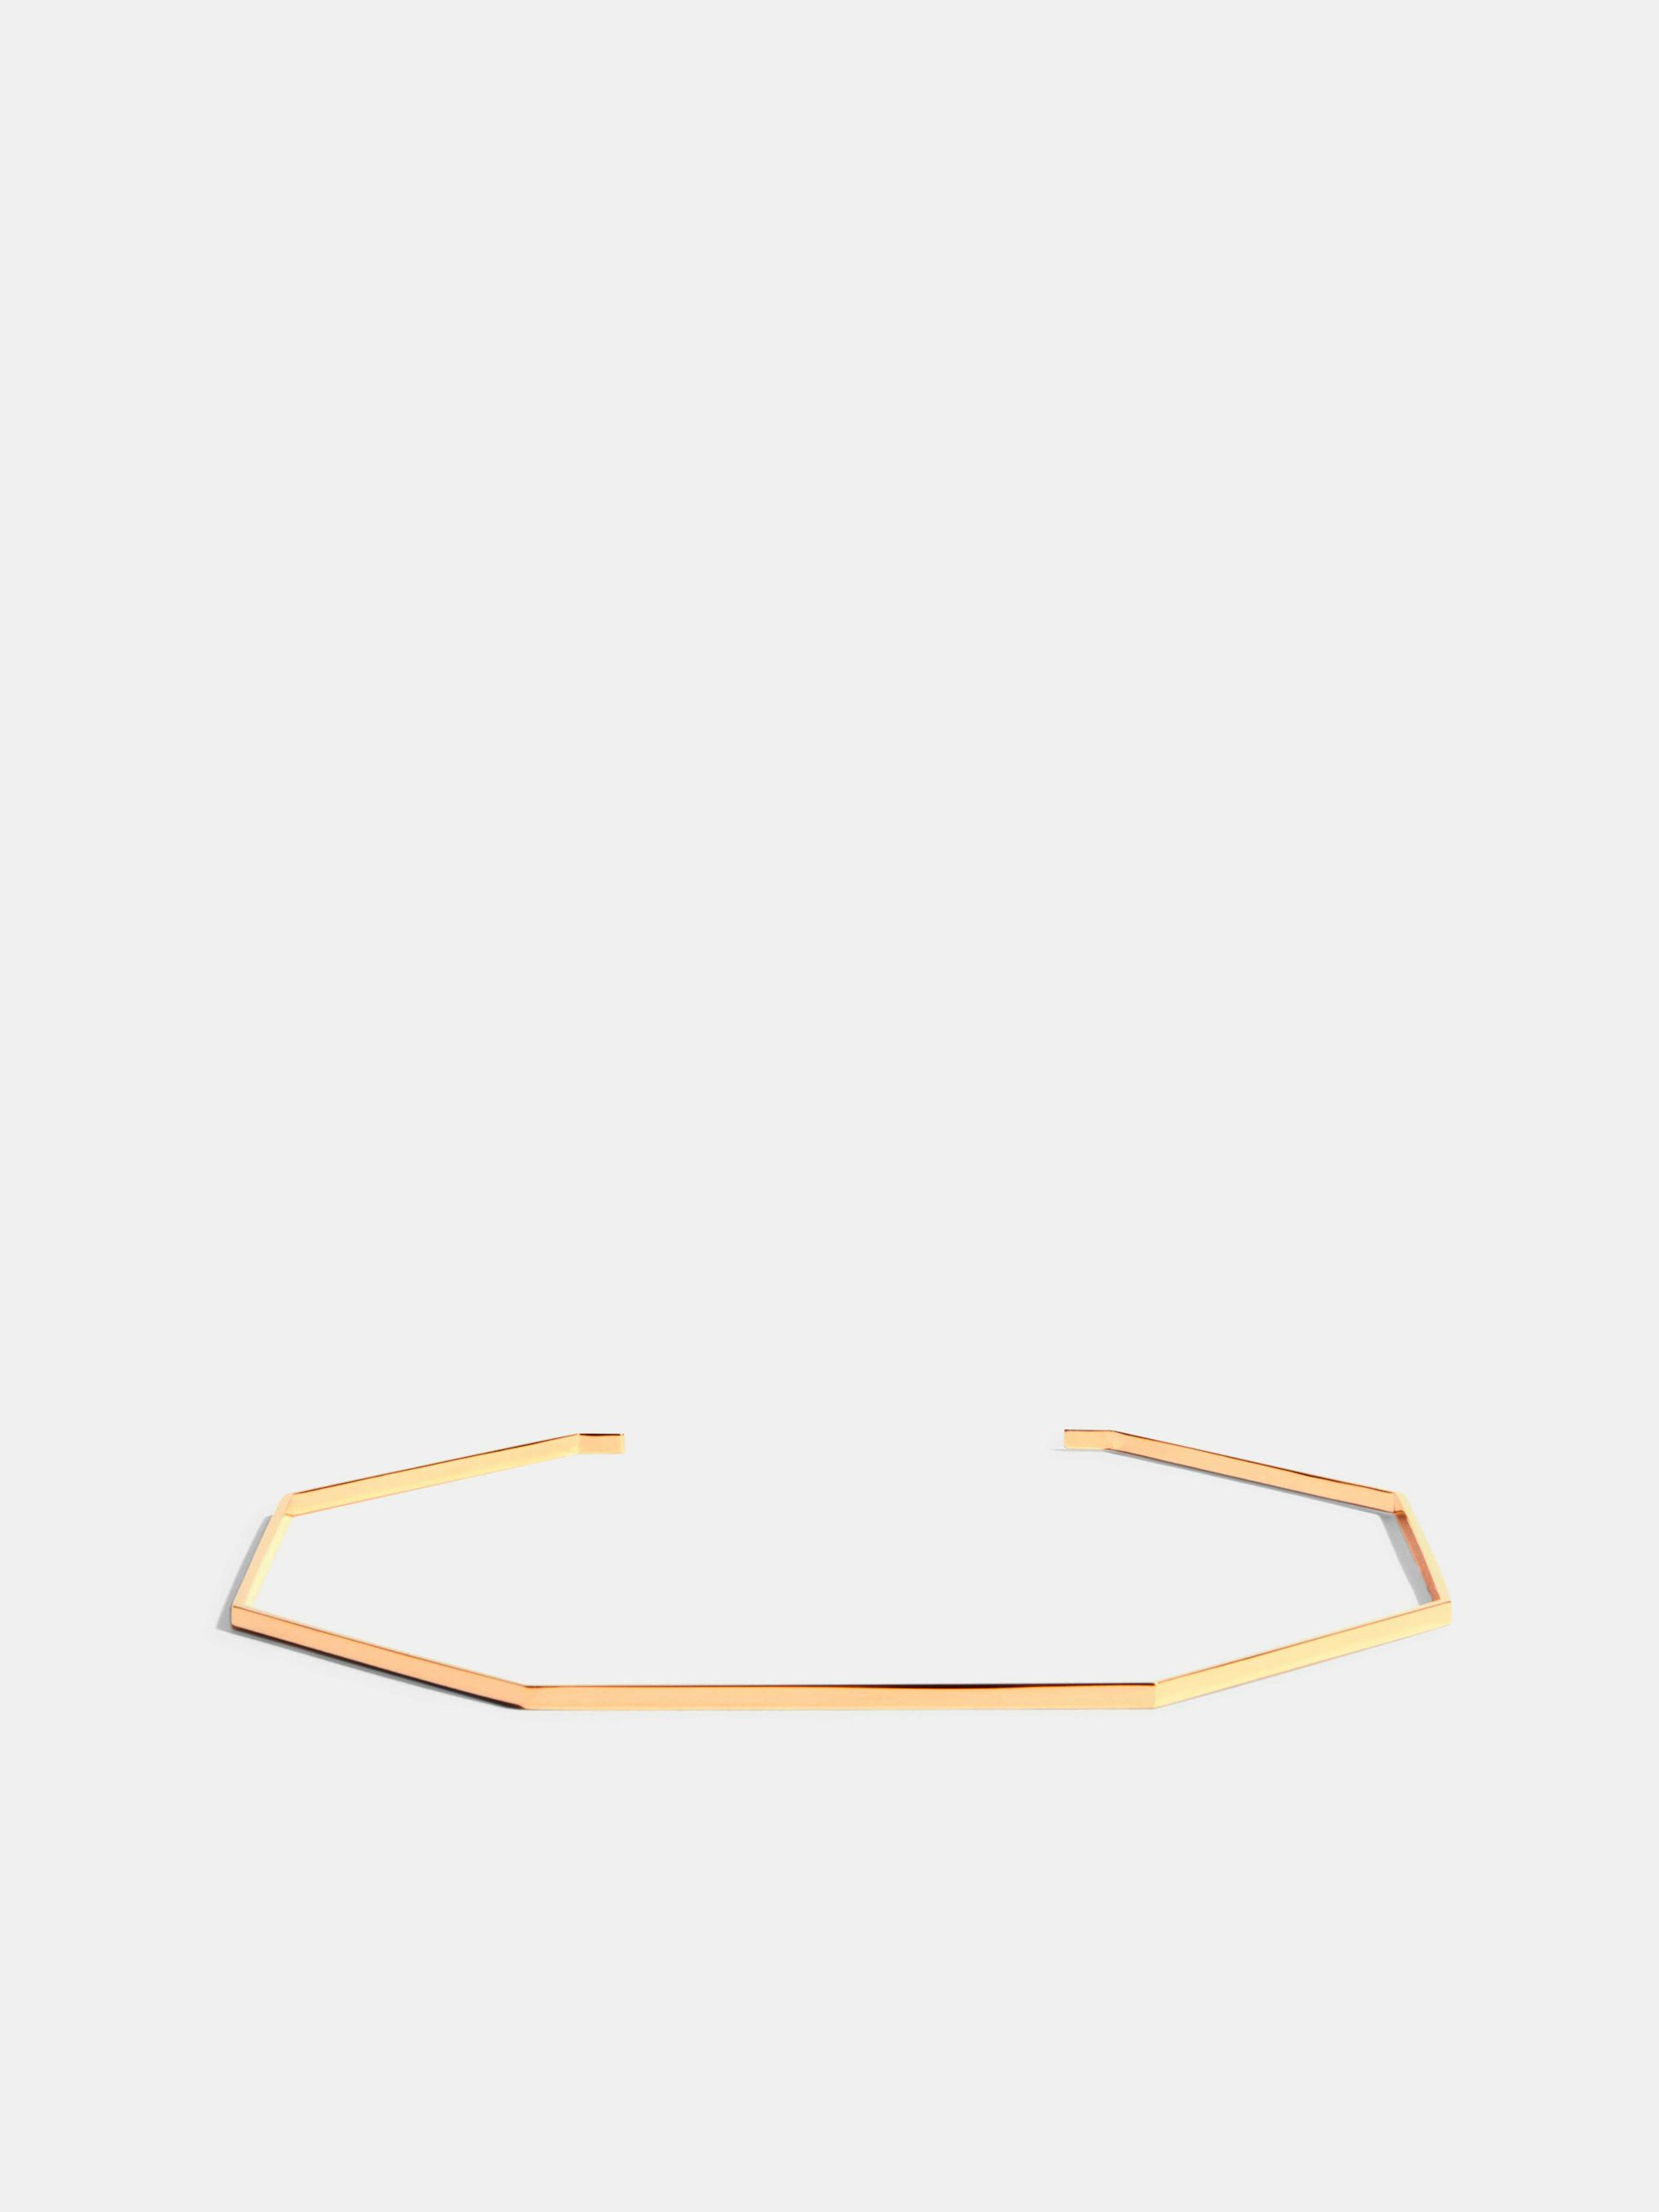 Octogone choker in 18k Fairmined ethical yellow gold